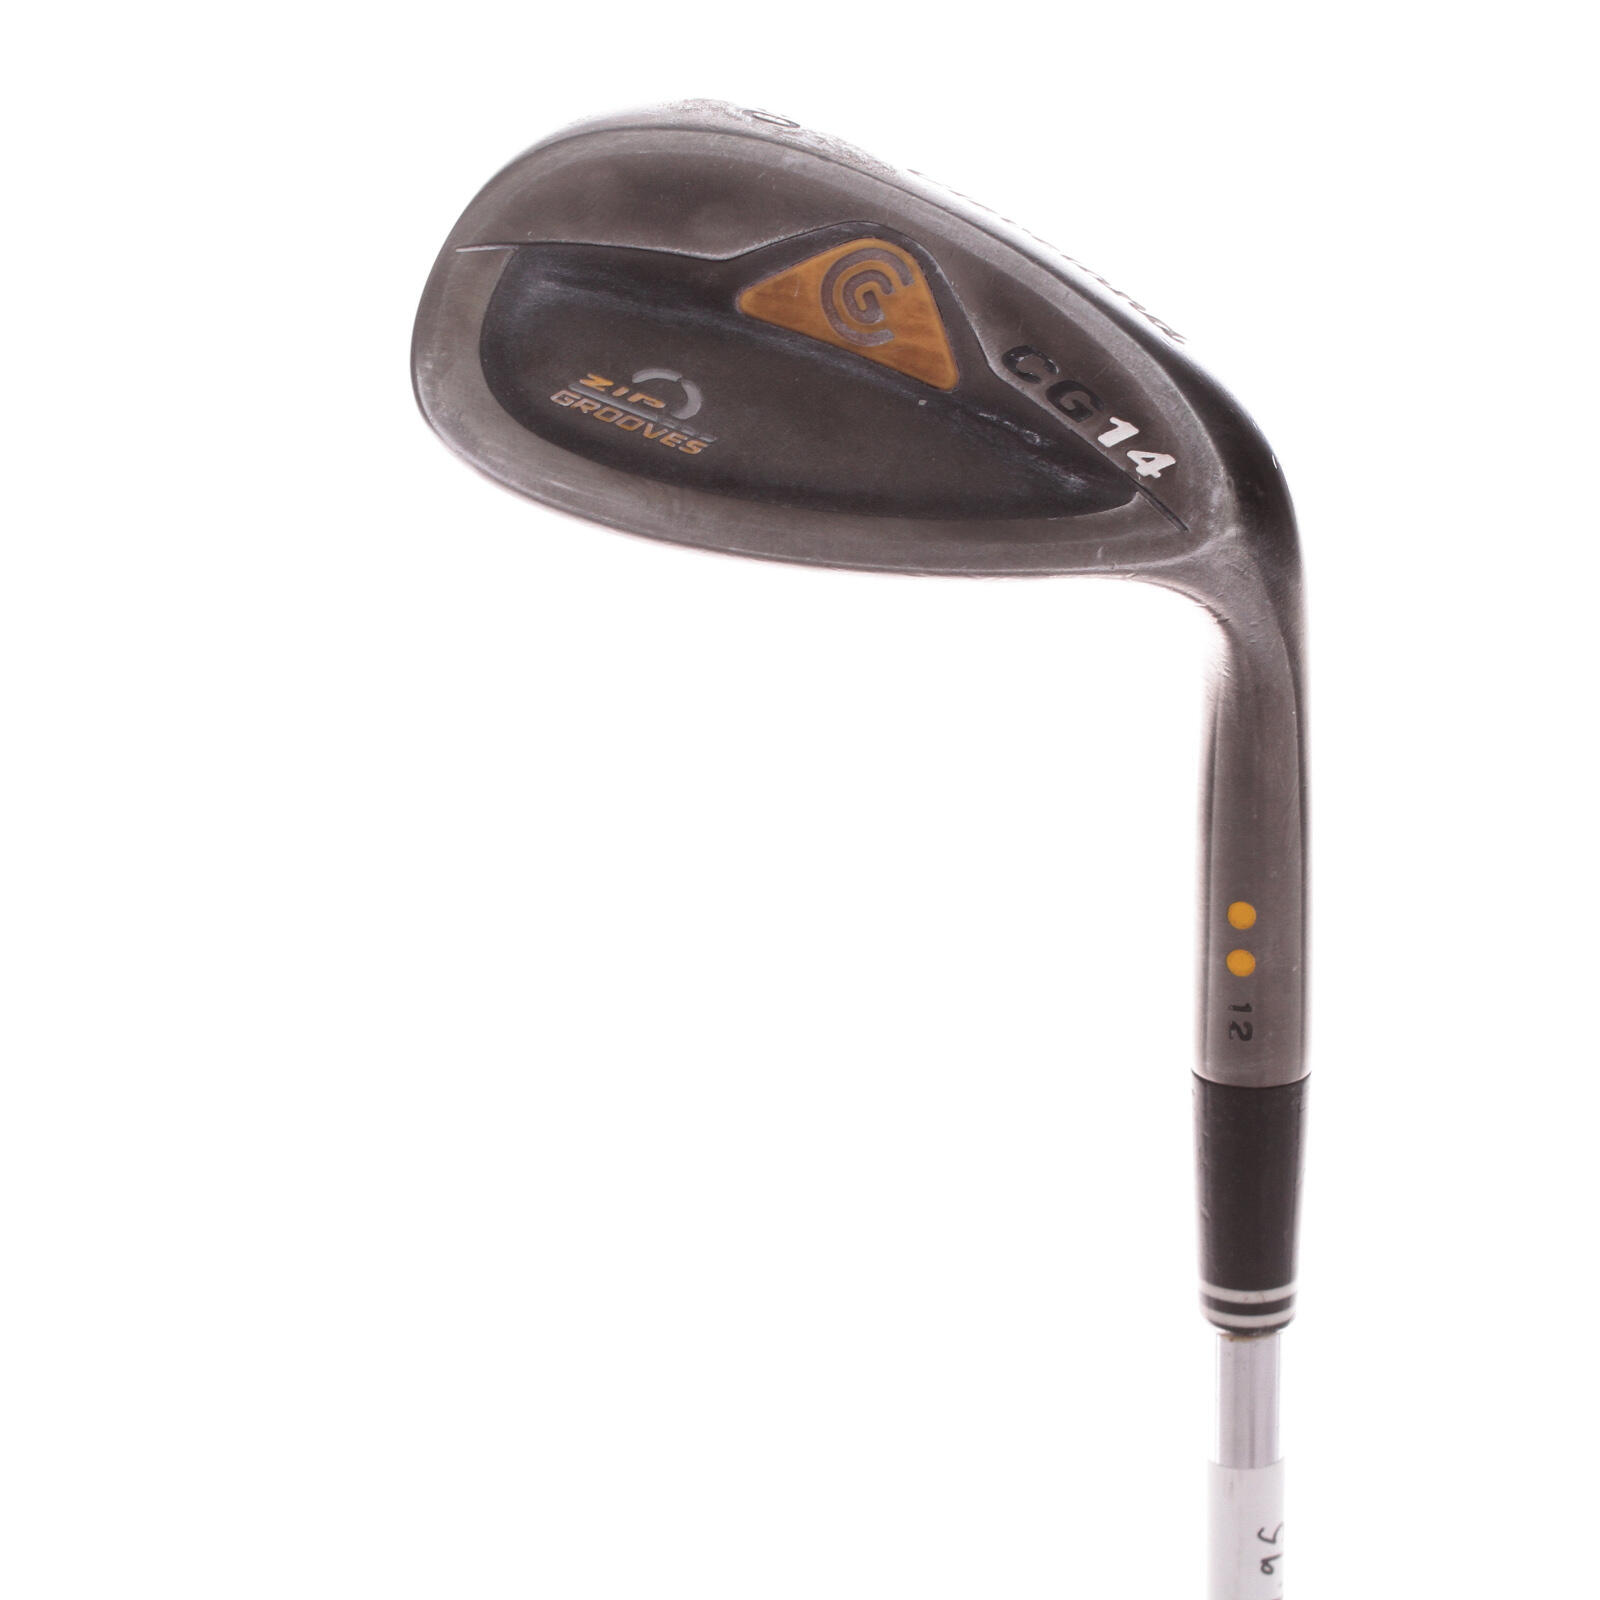 CLEVELAND GOLF USED - Lob Wedge Cleveland CG14 60 Degree Steel Shaft Right Handed - GRADE B